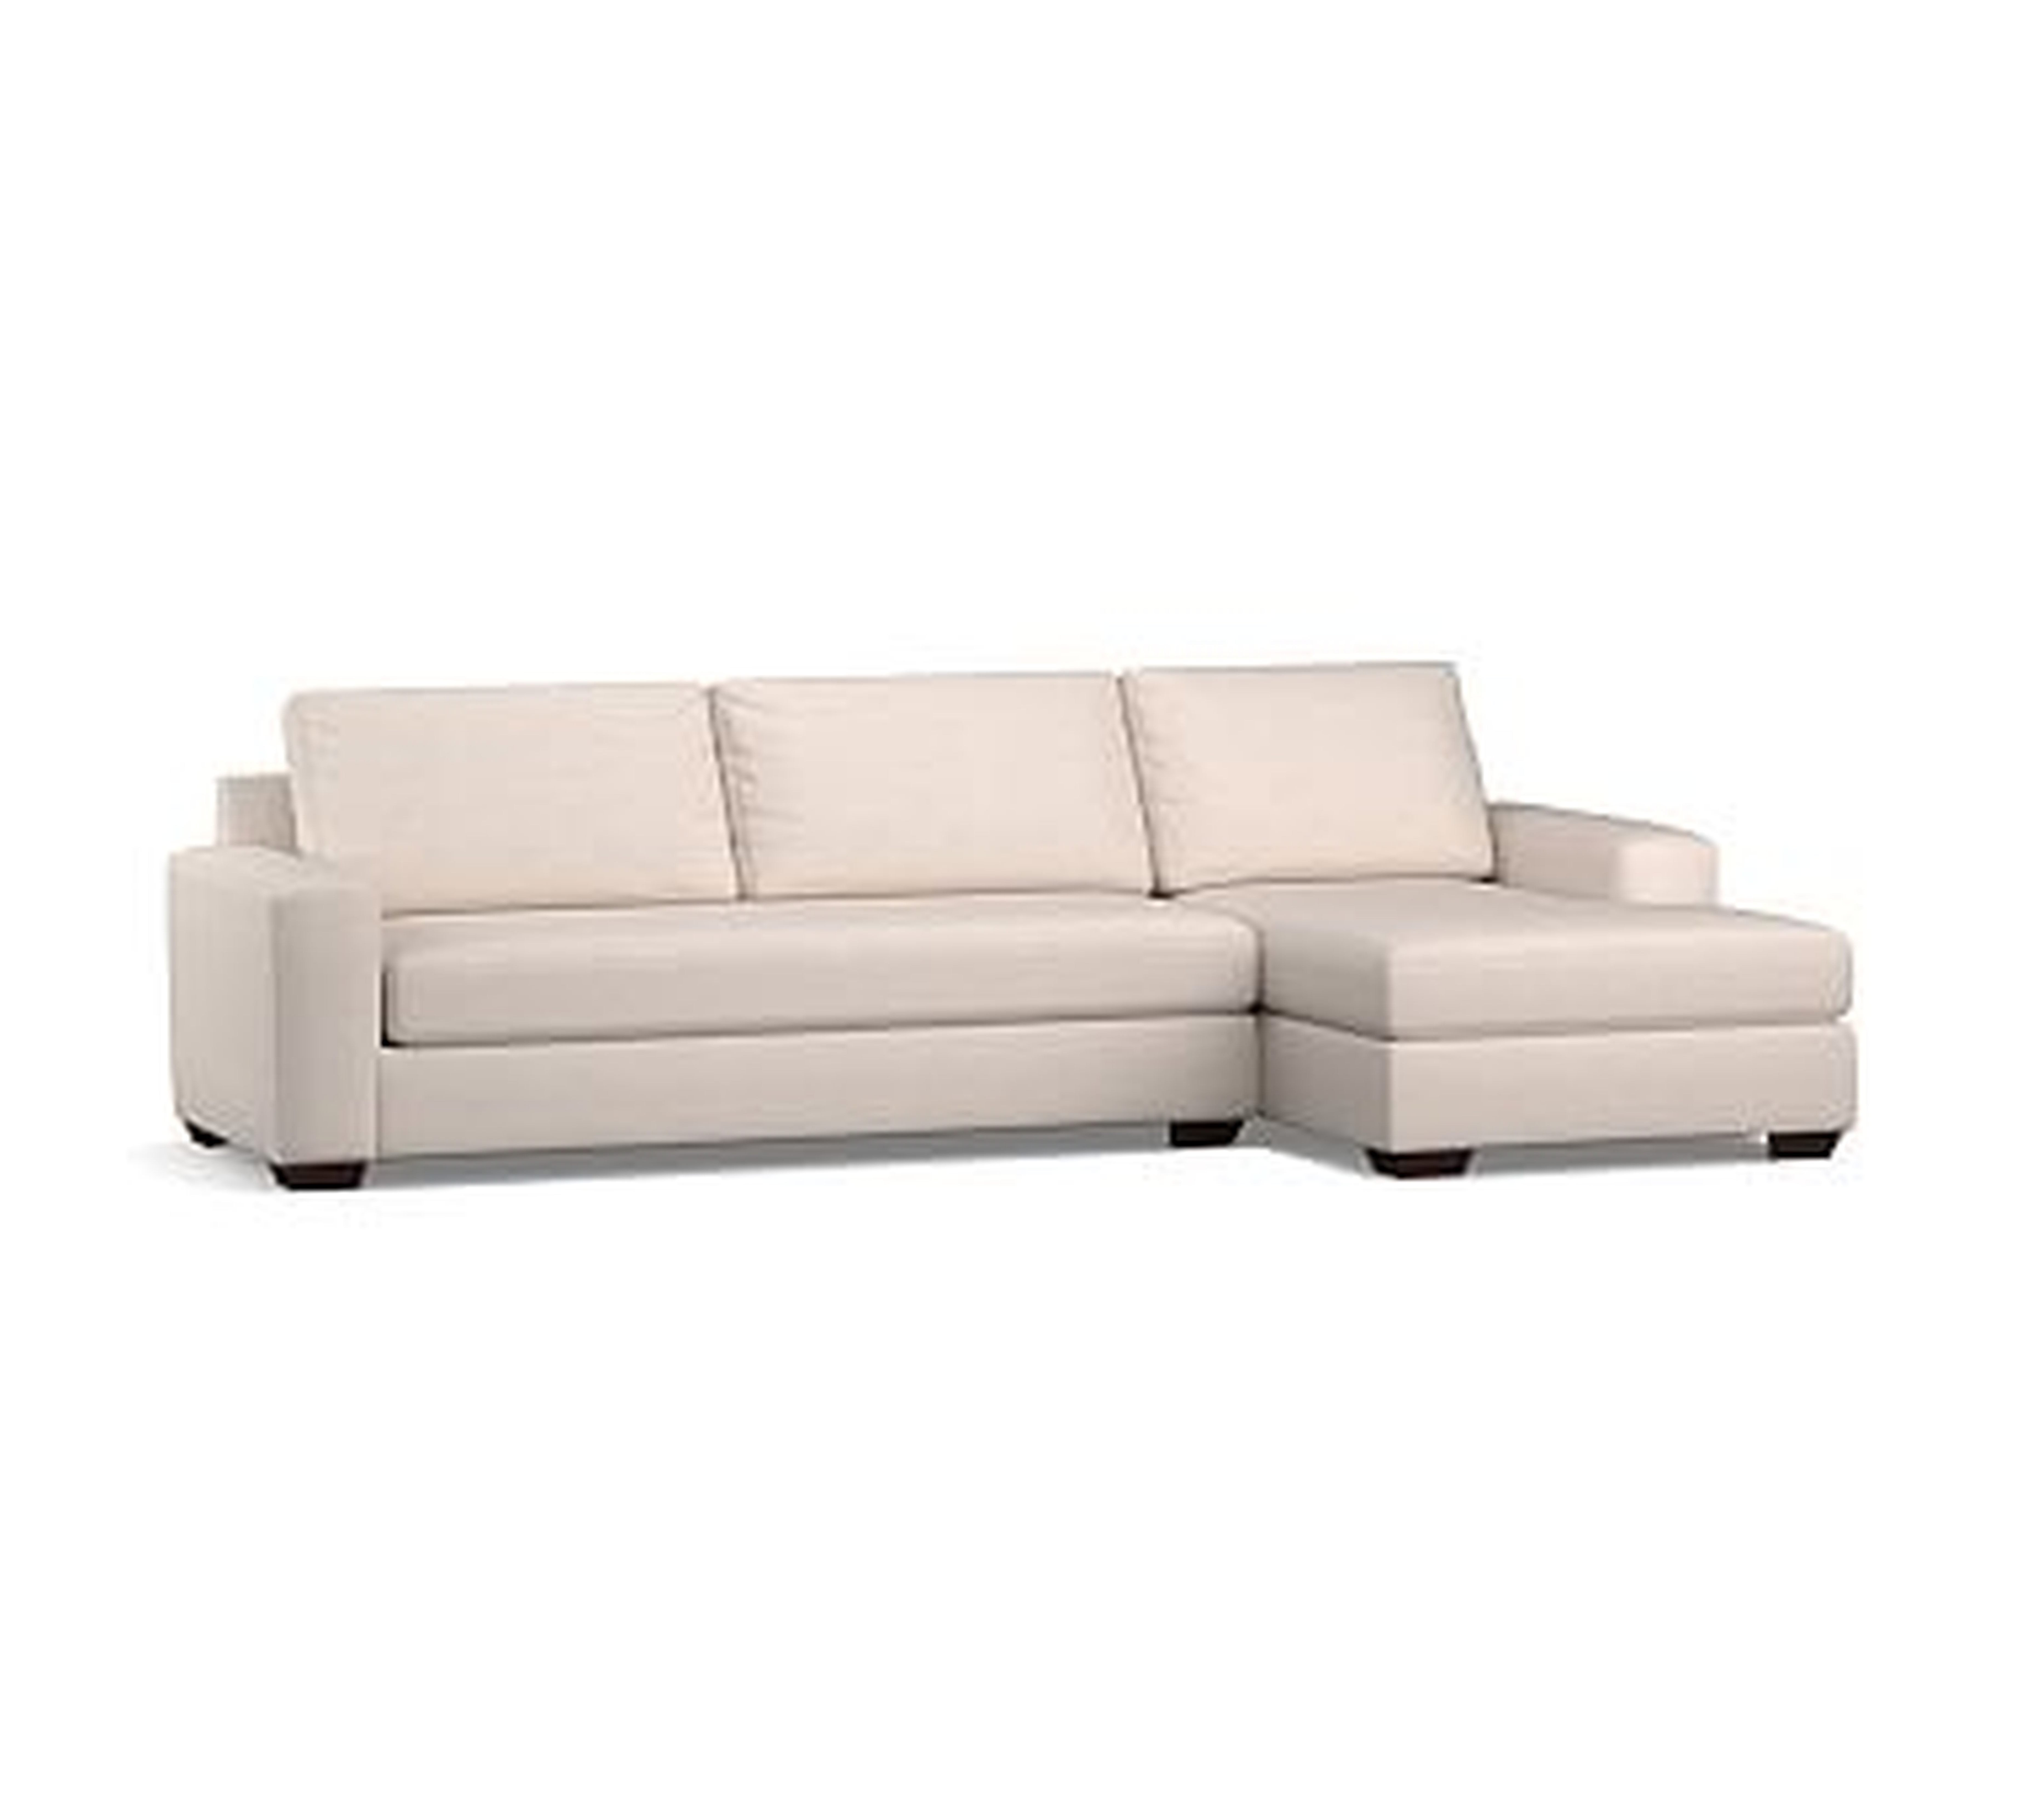 Big Sur Square Arm Upholstered Left Arm Sofa with Chaise Sectional and Bench Cushion, Down Blend Wrapped Cushions, Performance Brushed Basketweave Oatmeal - Pottery Barn